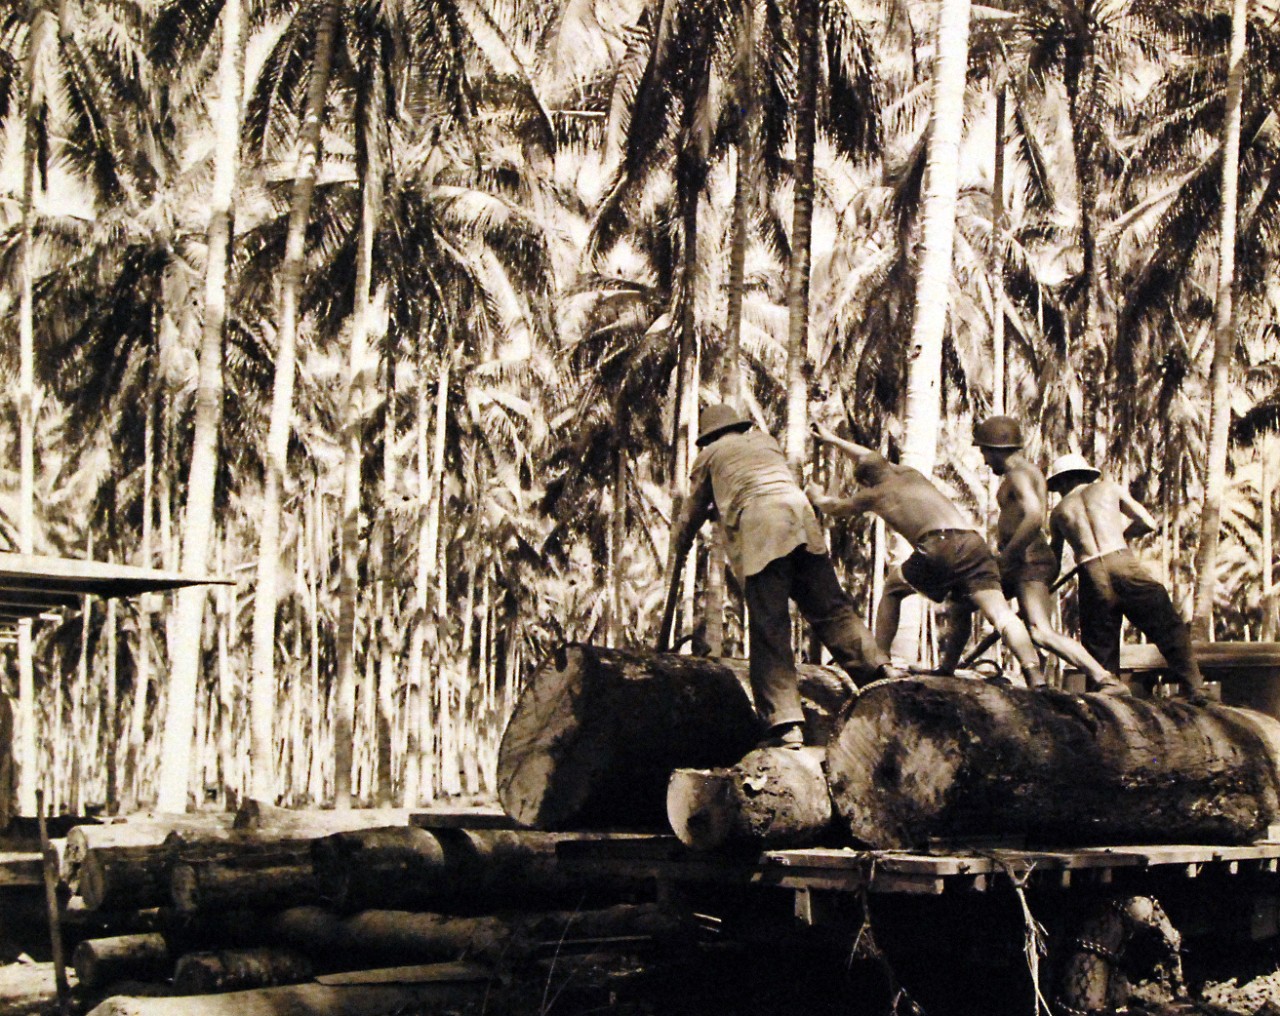 80-G-39220: Guadalcanal Campaign, August 1942-February 1943.  Navy Seabees doing construction work at Guadalcanal, working in the sawmill, January 30, 1943.   Official U.S. Navy photograph, now in the collections of the National Archives.  (2016/12/06).